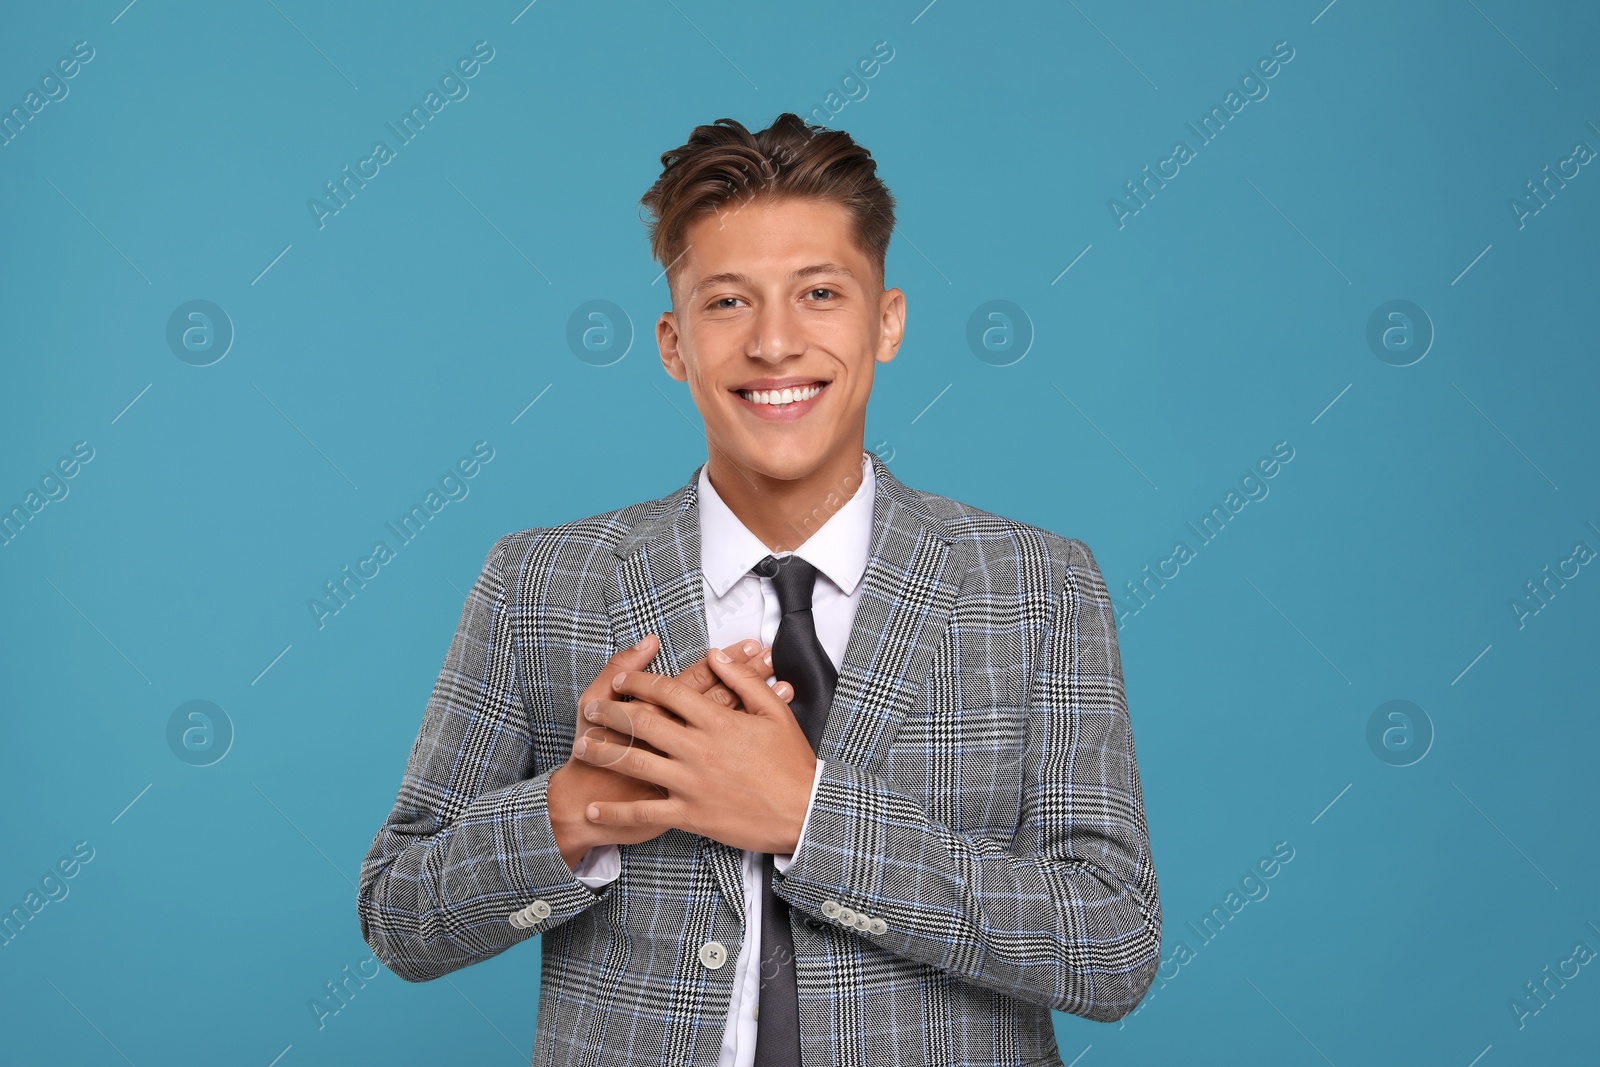 Photo of Thank you gesture. Happy grateful man with hands on chest against light blue background